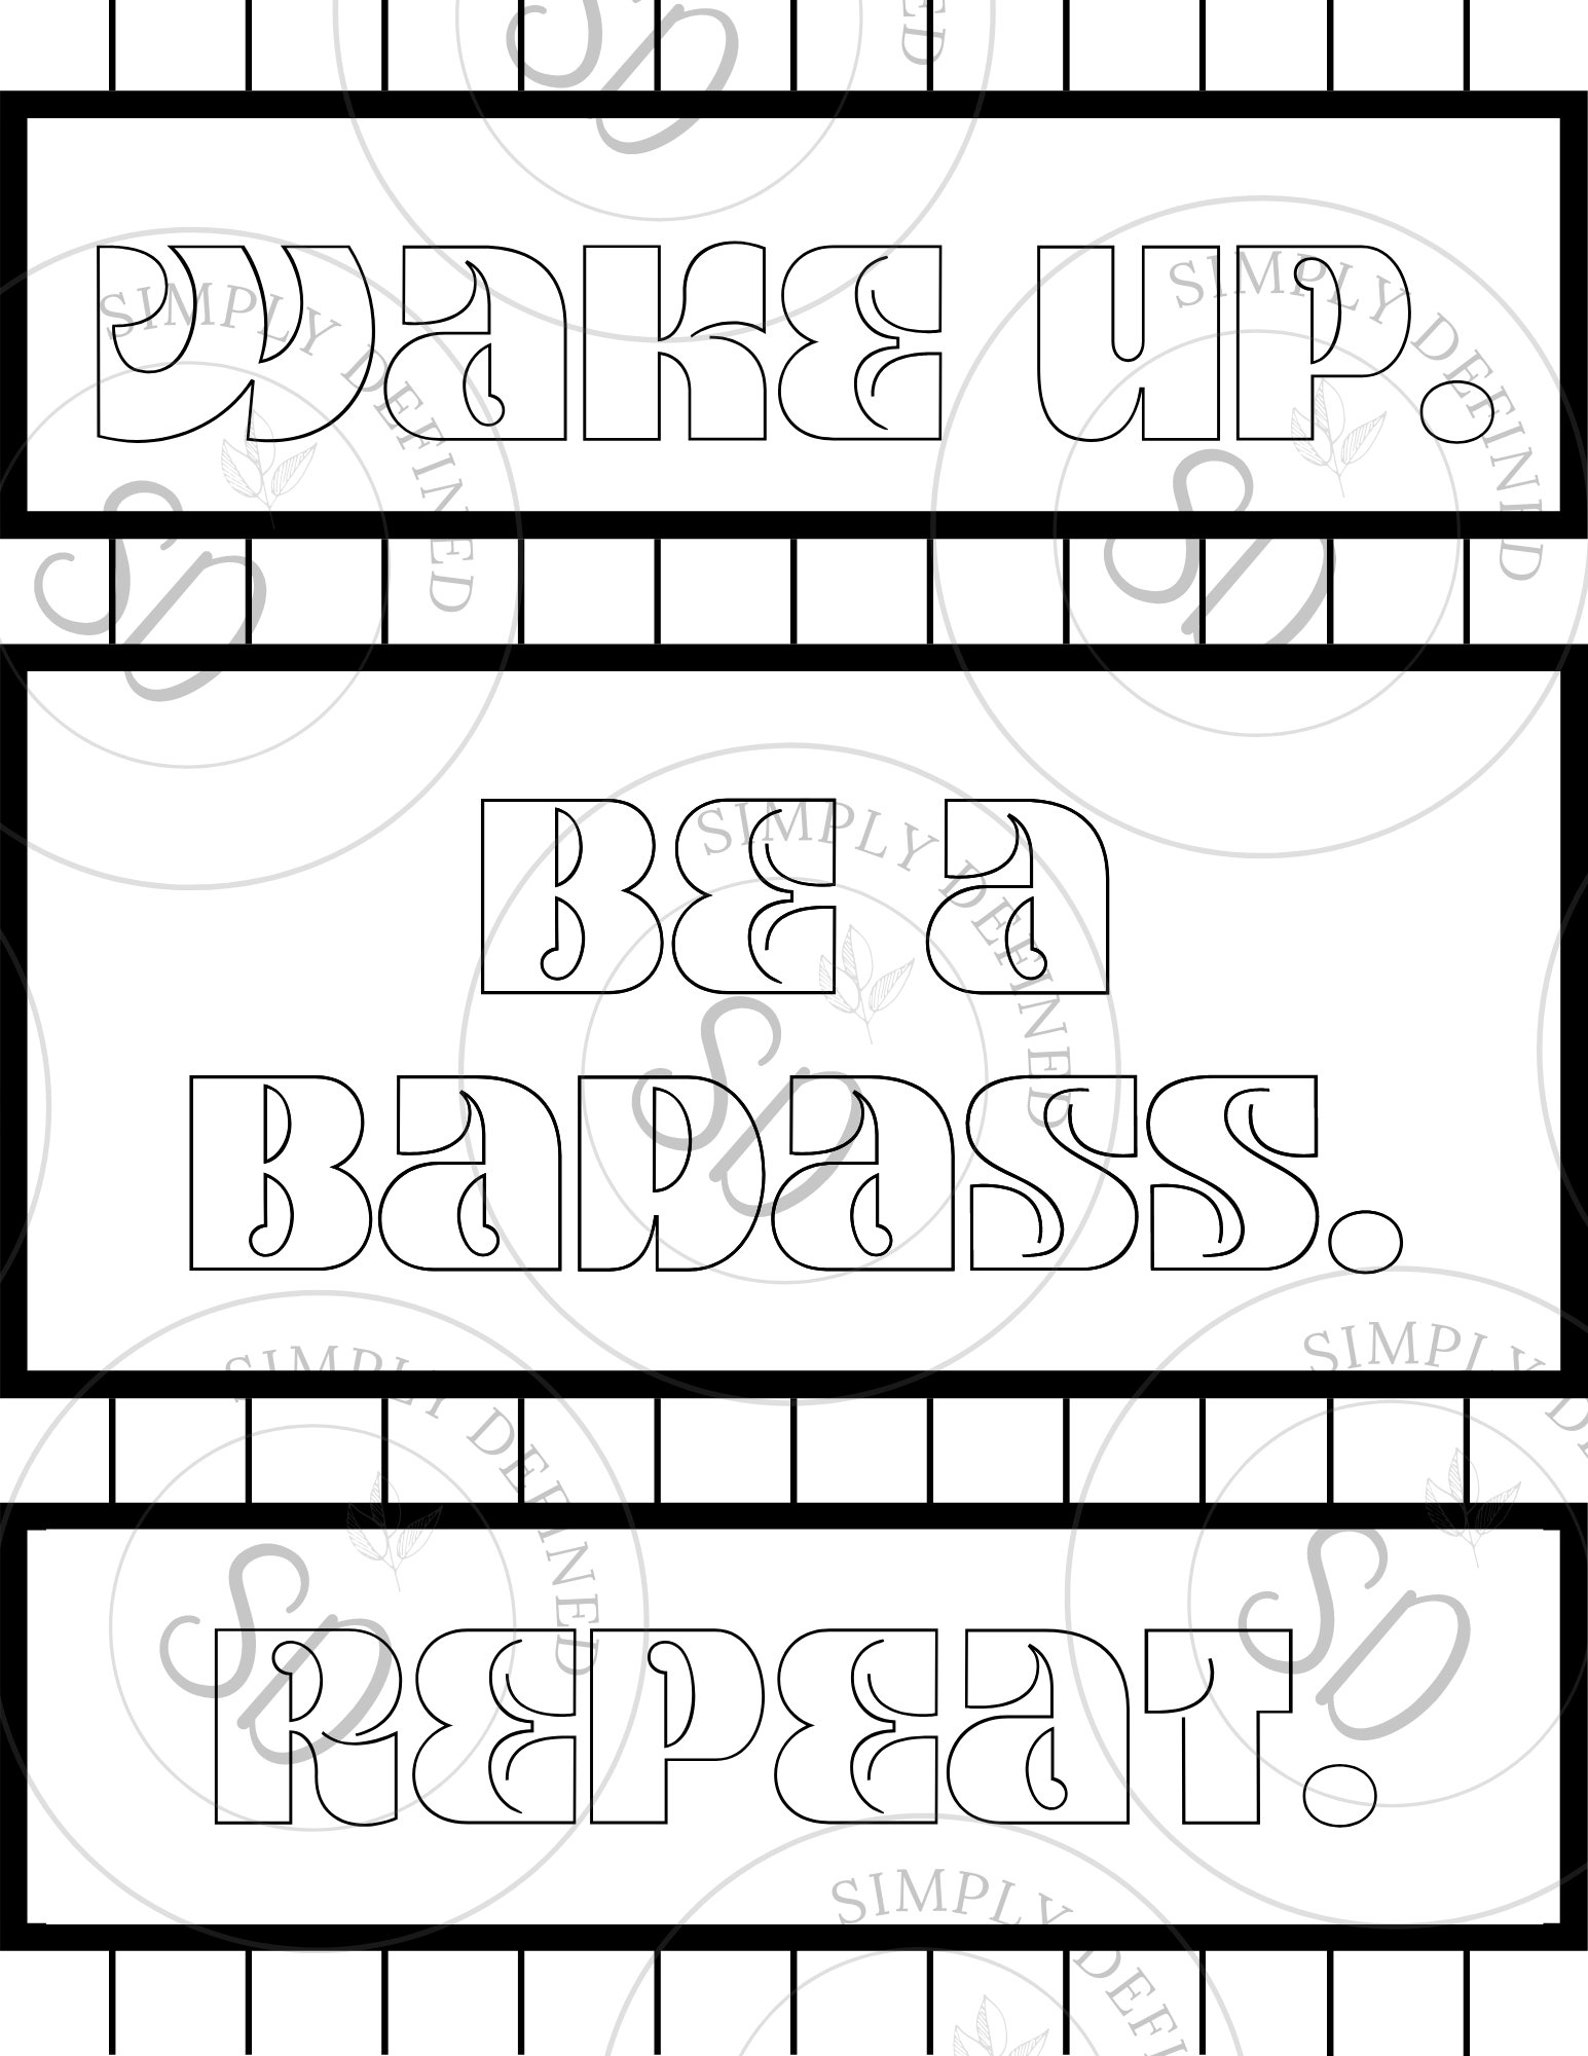 Be a Badass Adult coloring pages printable downloads | Etsy